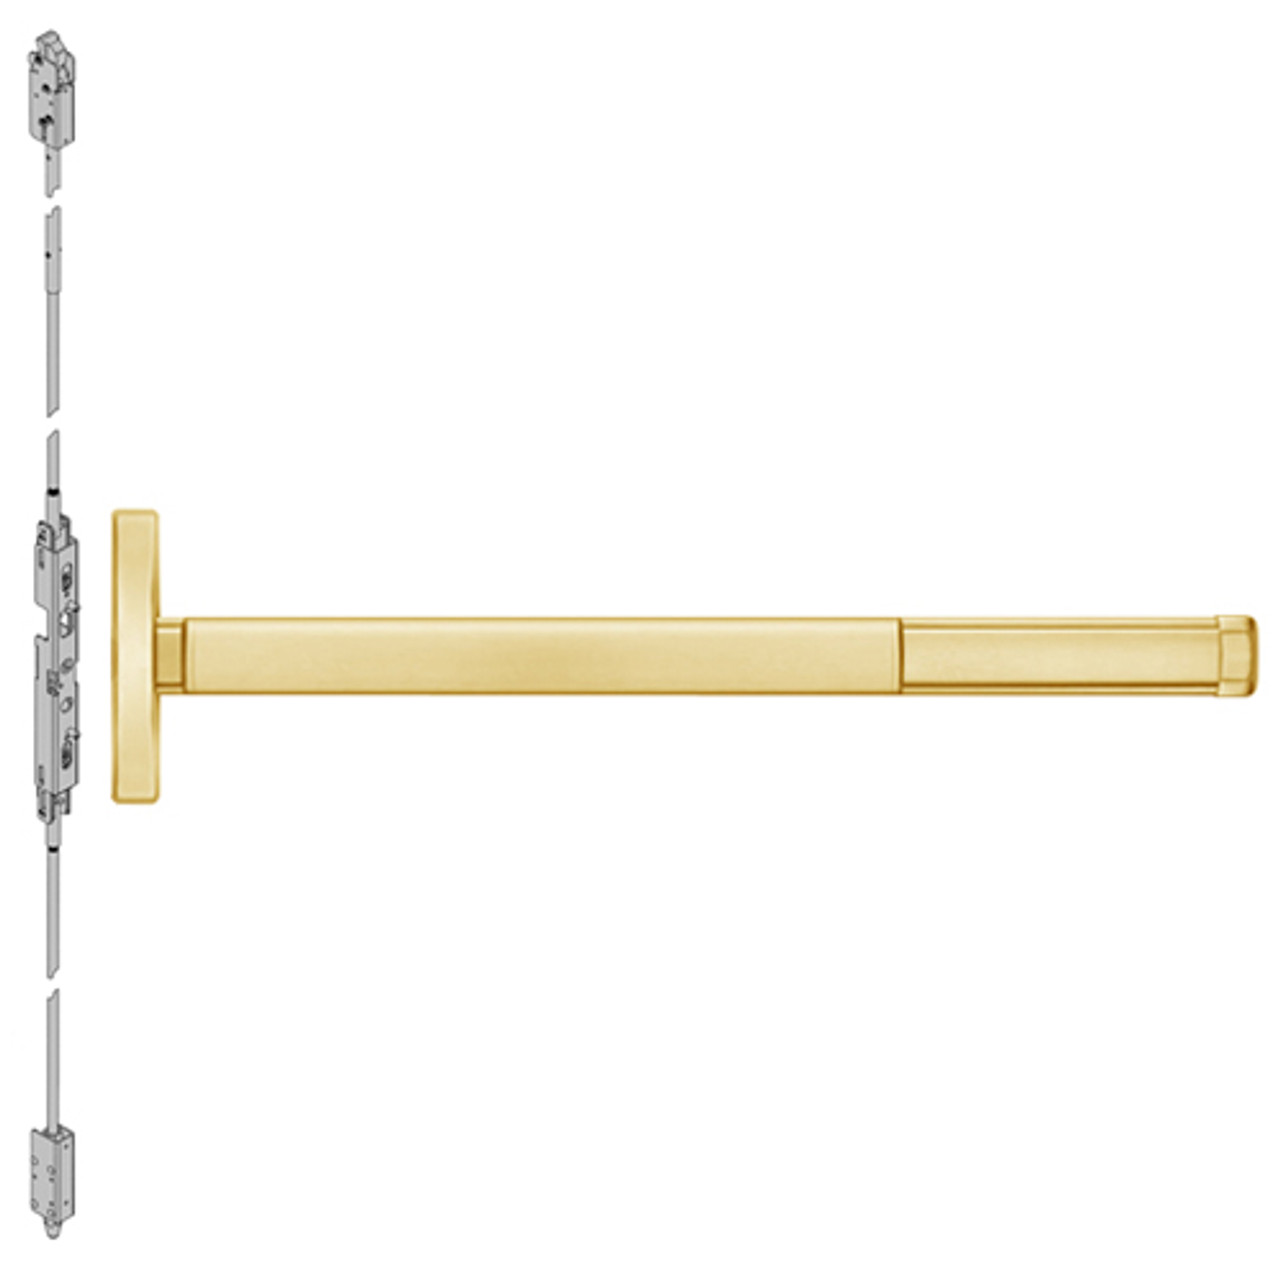 FL2614LBR-605-48 PHI 2600 Series Fire Rated Concealed Vertical Rod Exit Device Prepped for Lever Always Active with Less Bottom Rod in Bright Brass Finish